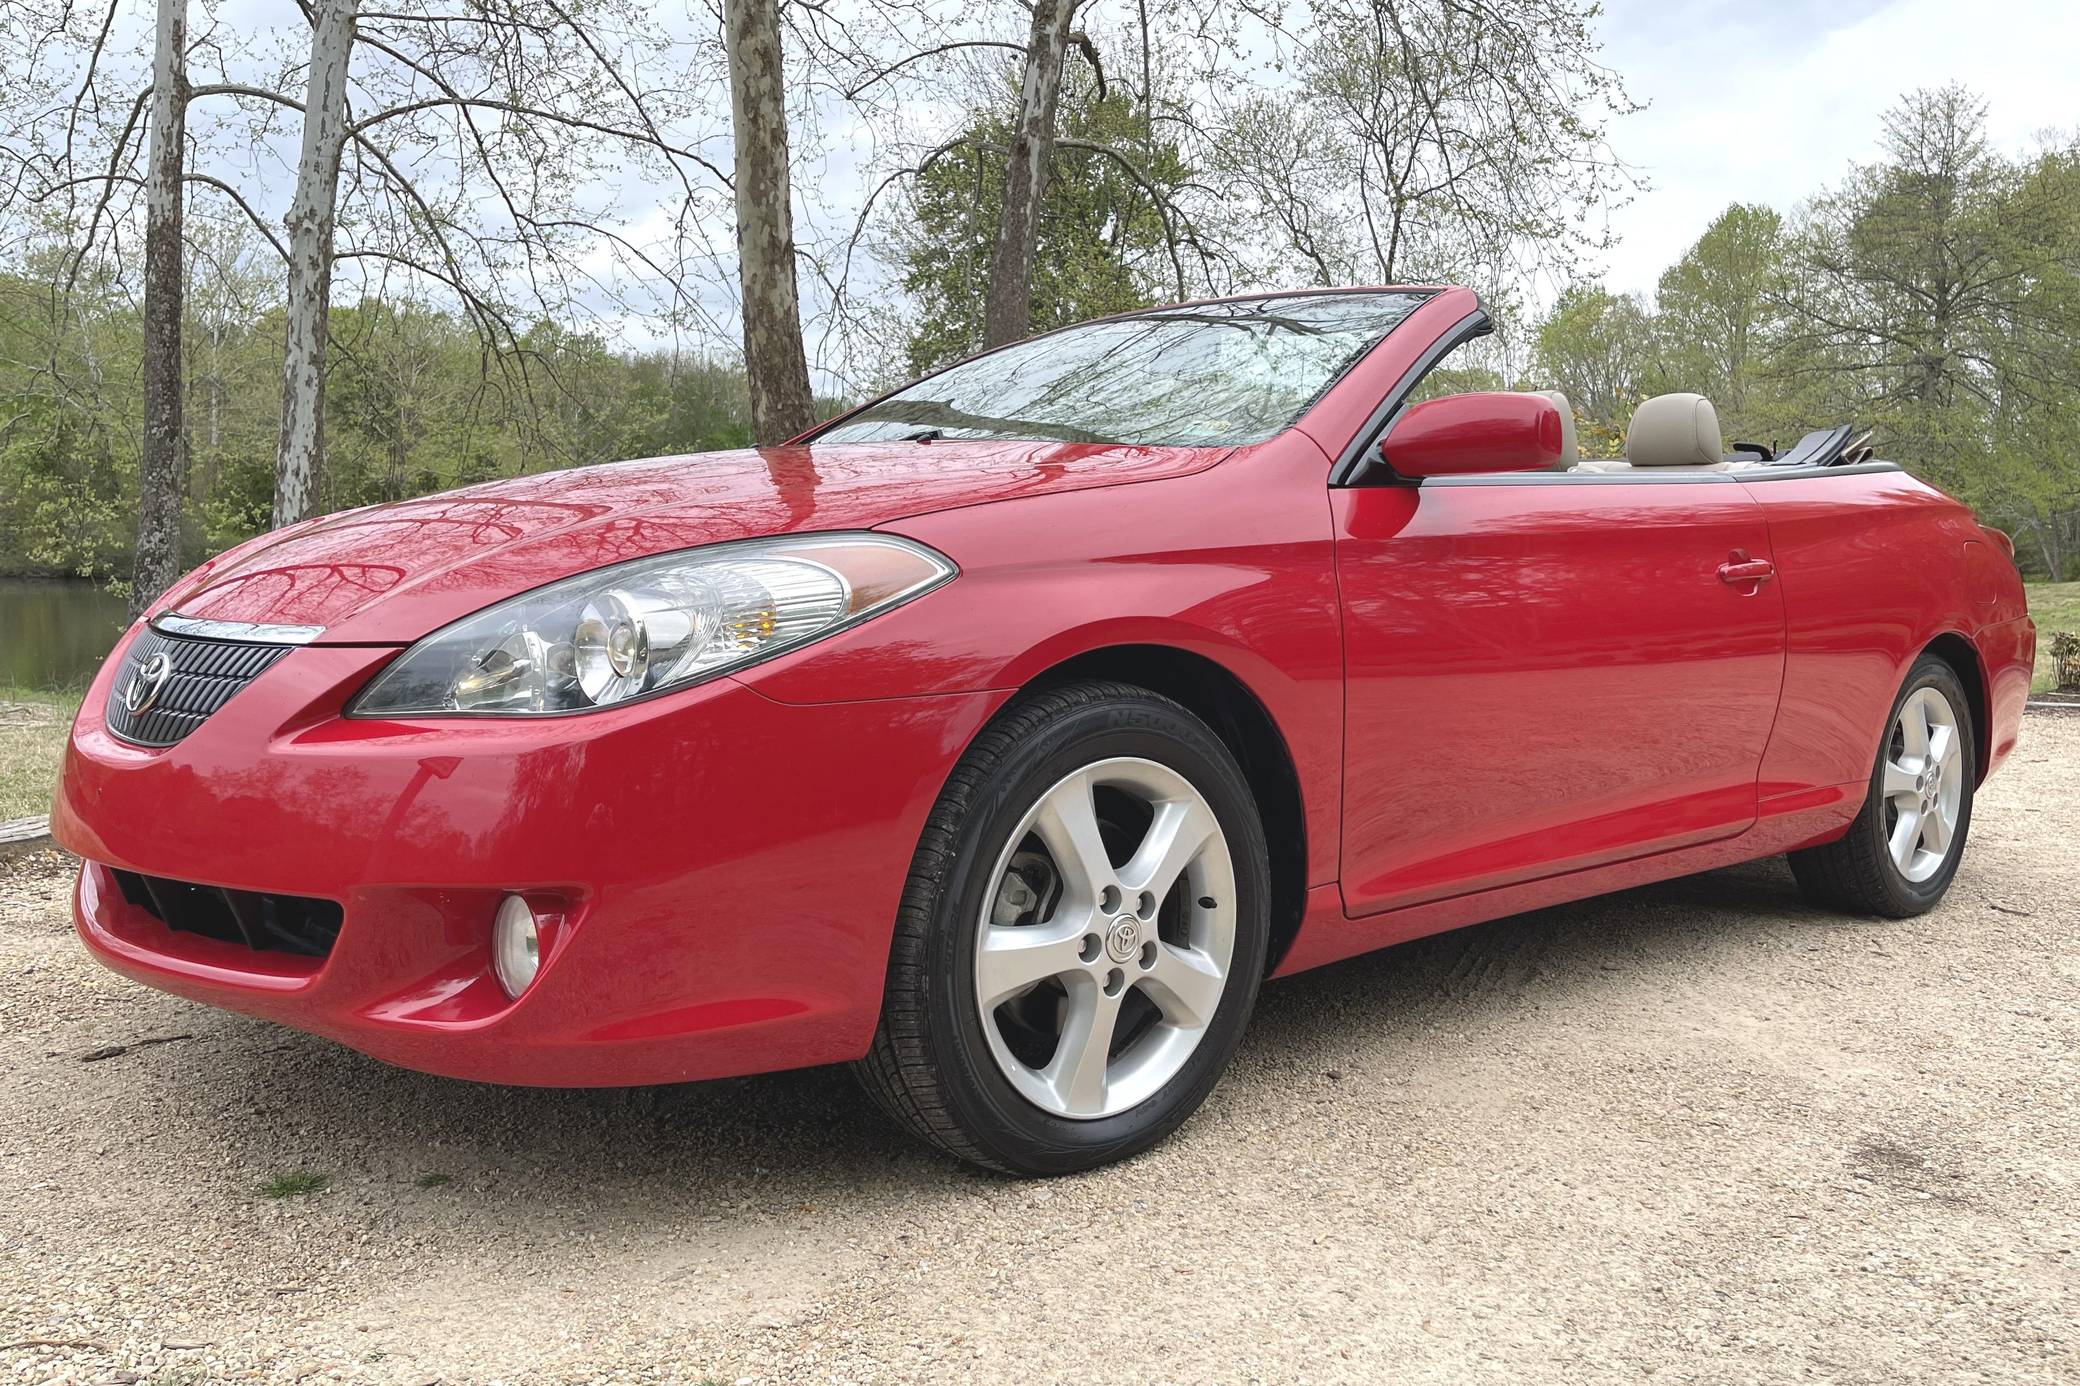 2006 Toyota Camry Solara SLE V6 Convertible for Sale - Cars & Bids